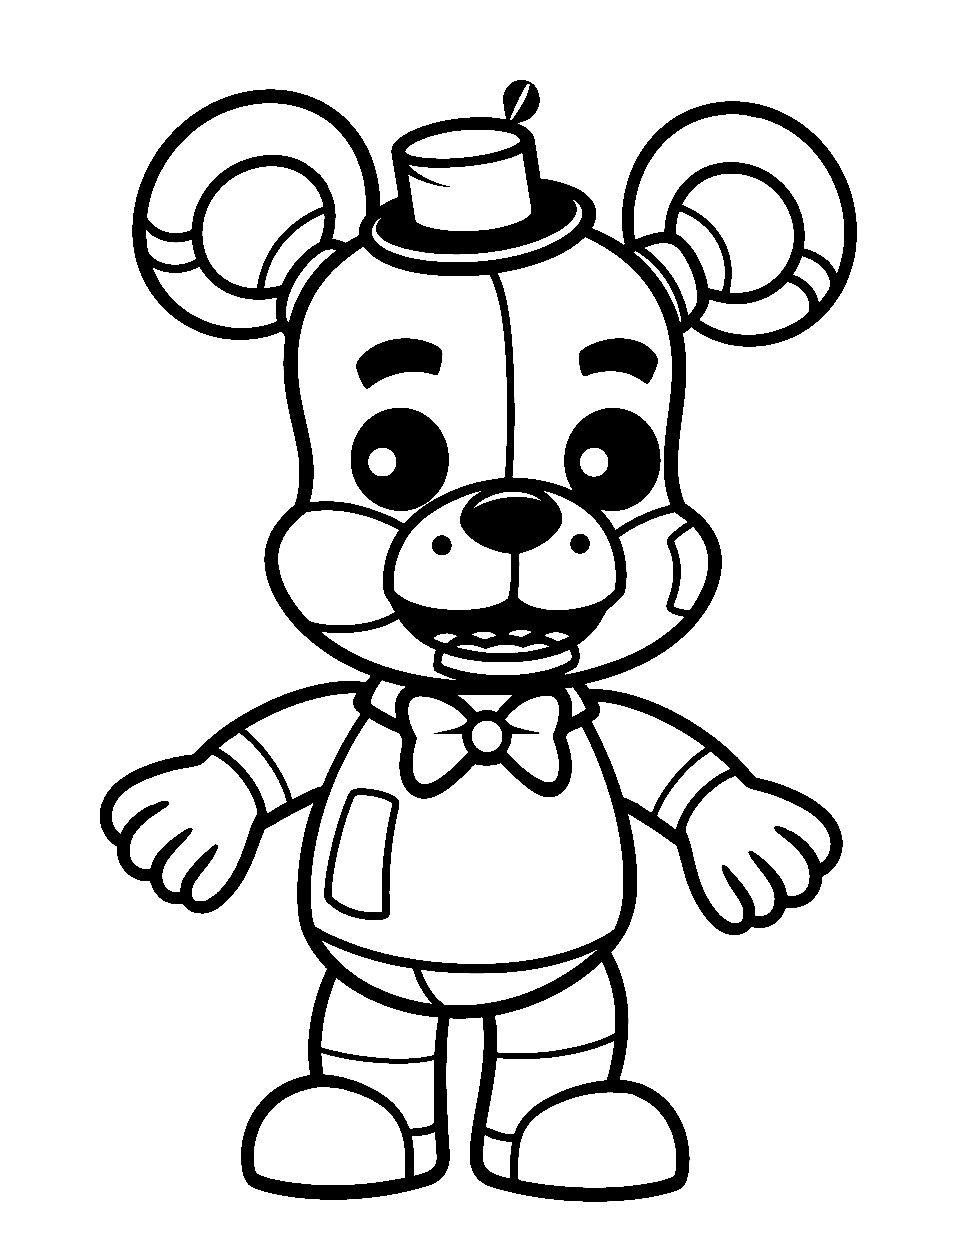 Cutesy Toy Freddy Five Nights at Freddys Coloring Page - Toy Freddy in a cute pose.